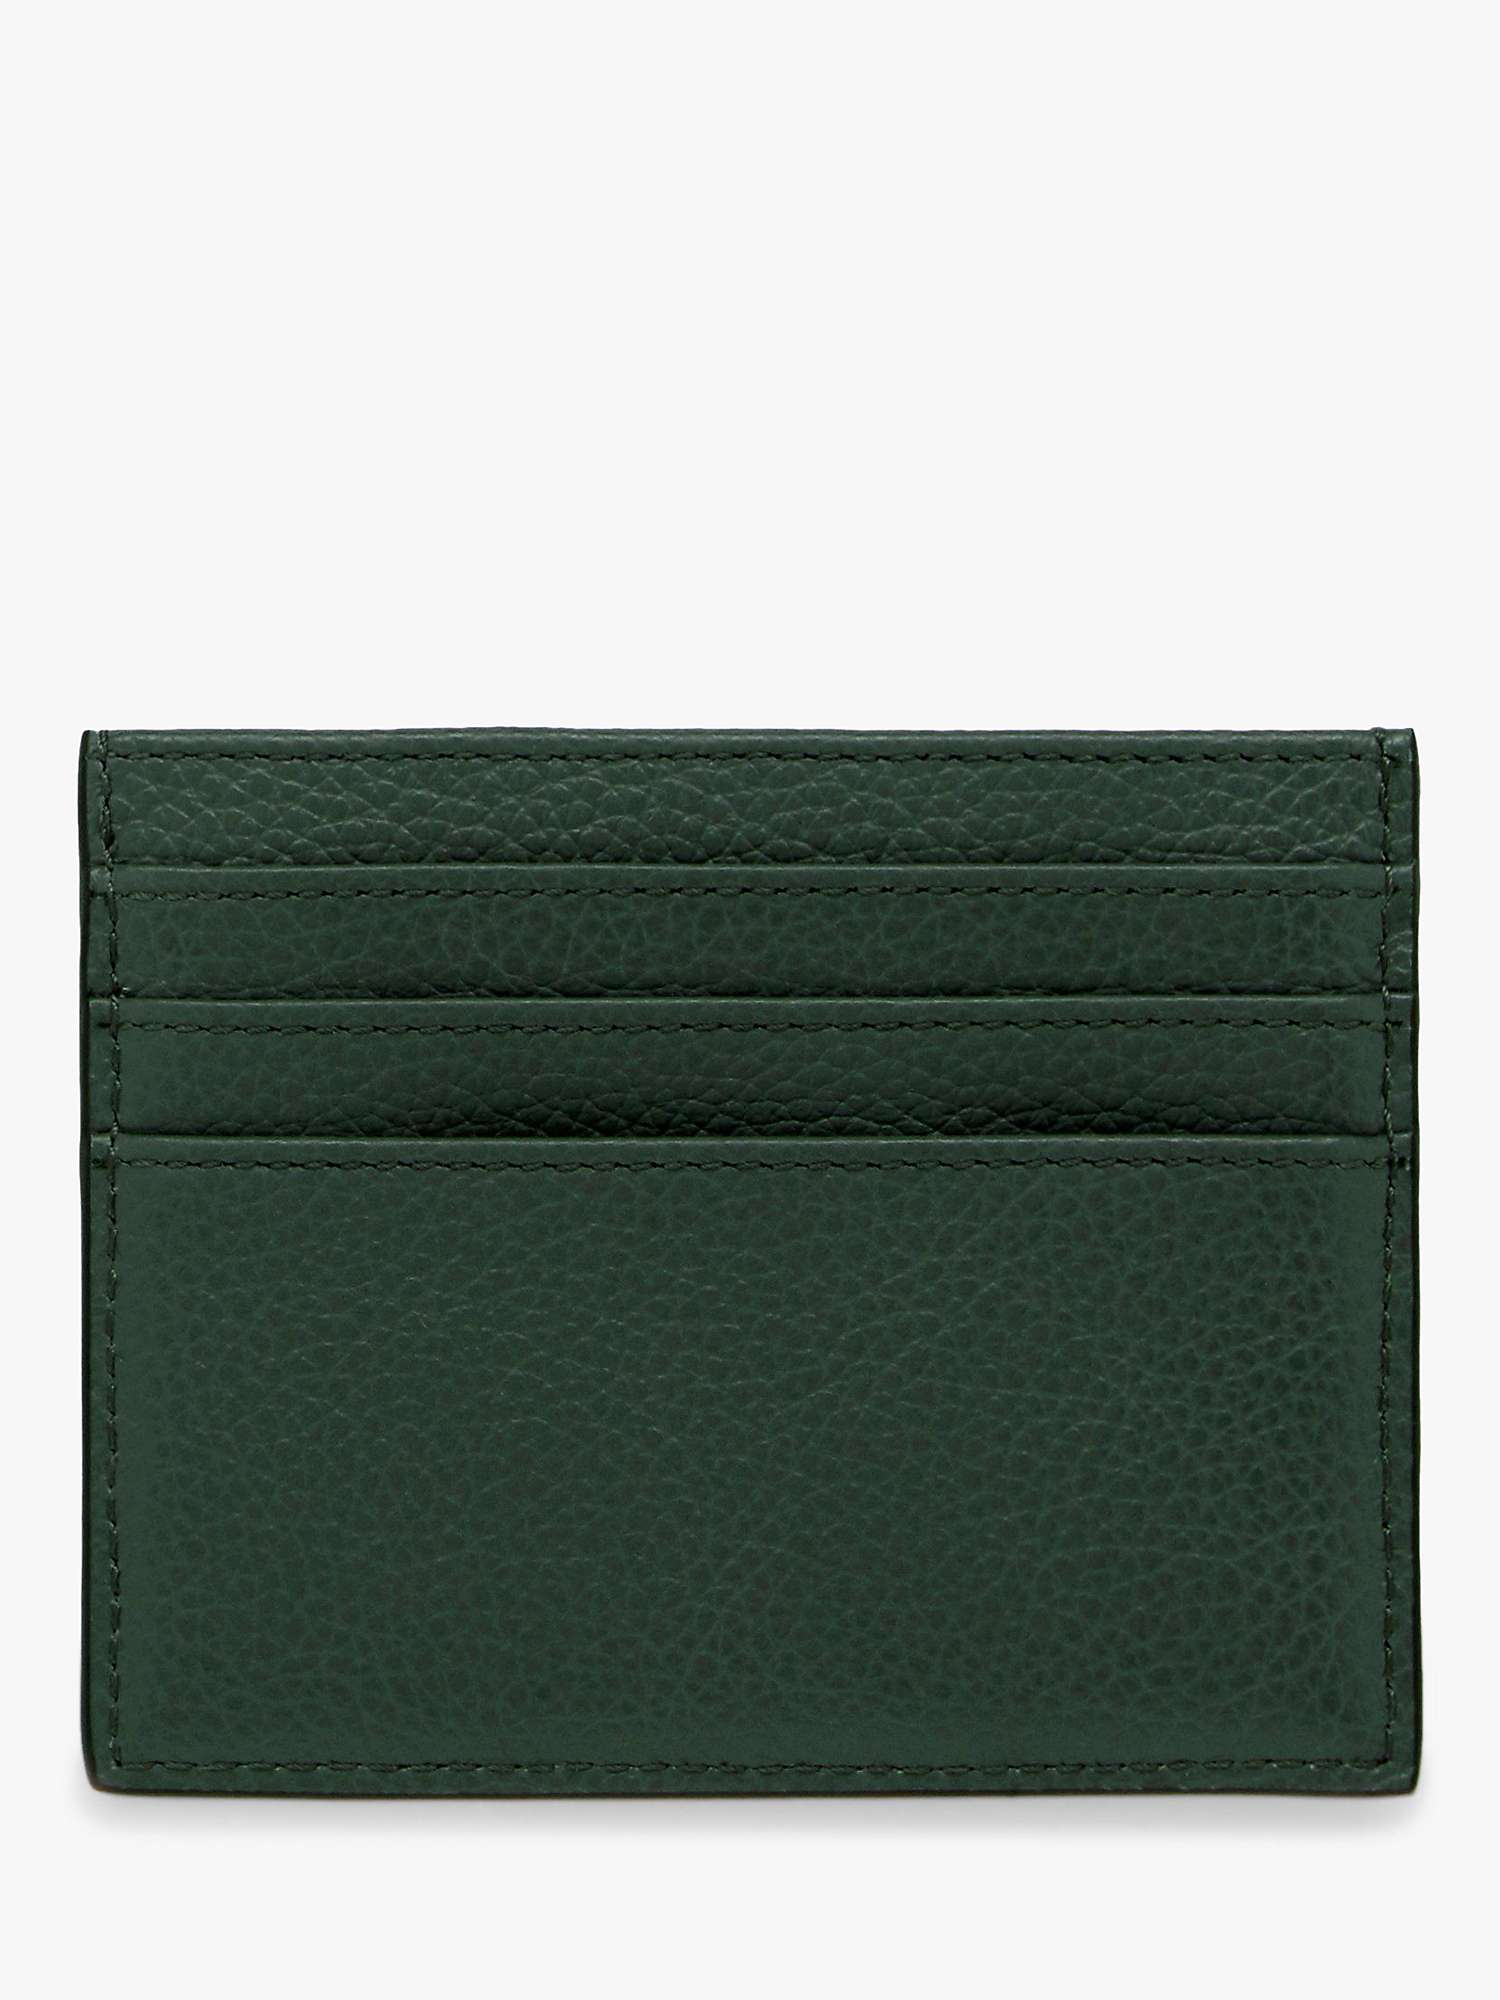 Buy Mulberry Small Classic Grain Leather Zipped Credit Card Slip Online at johnlewis.com